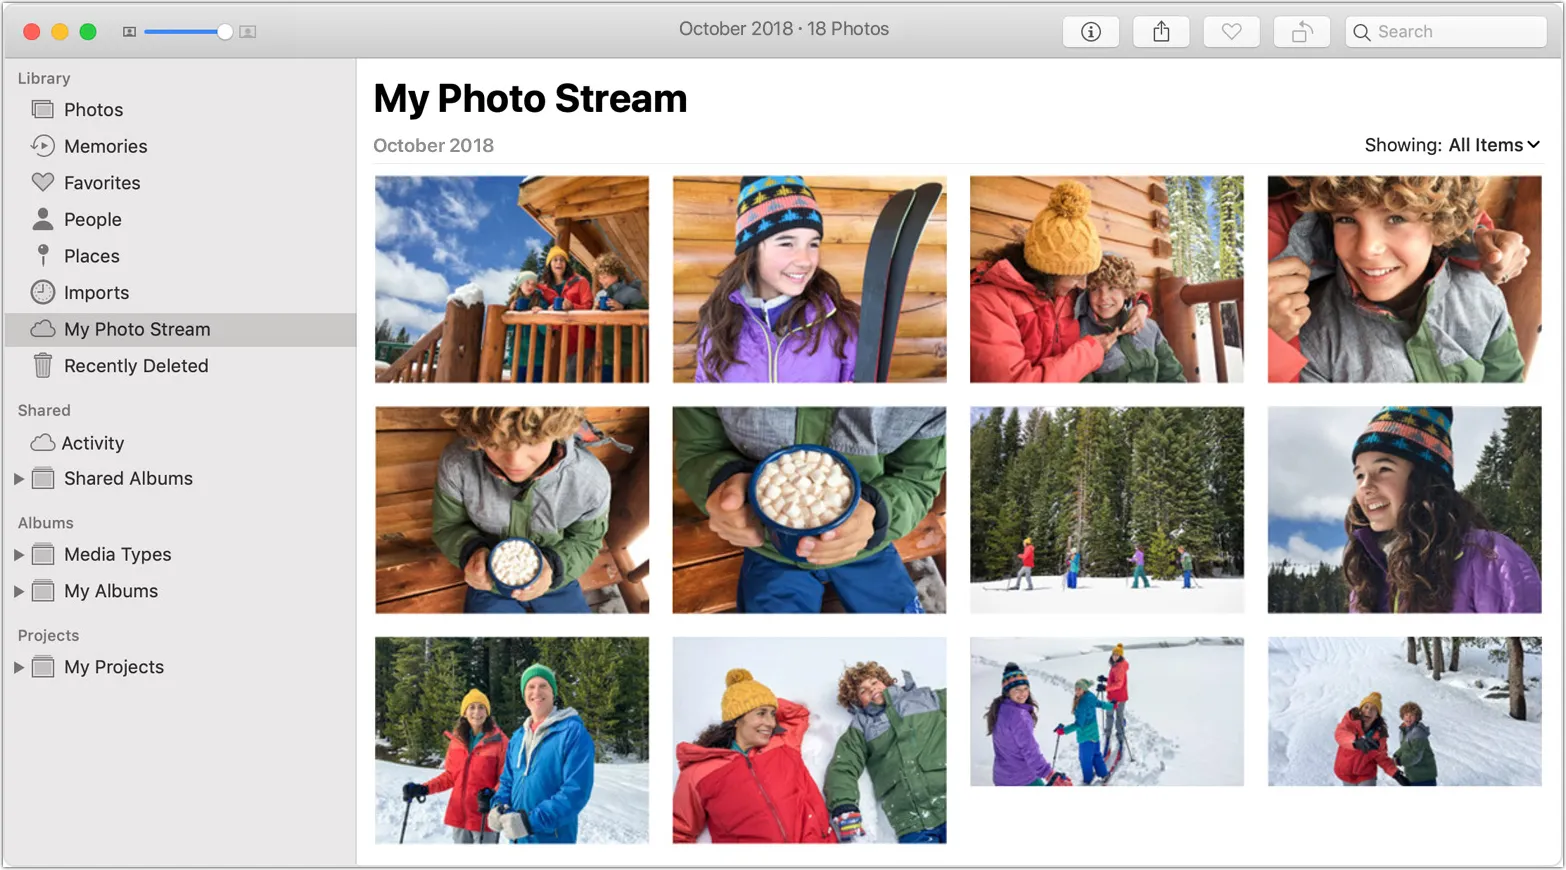 How To Delete Photos From The Photo Stream